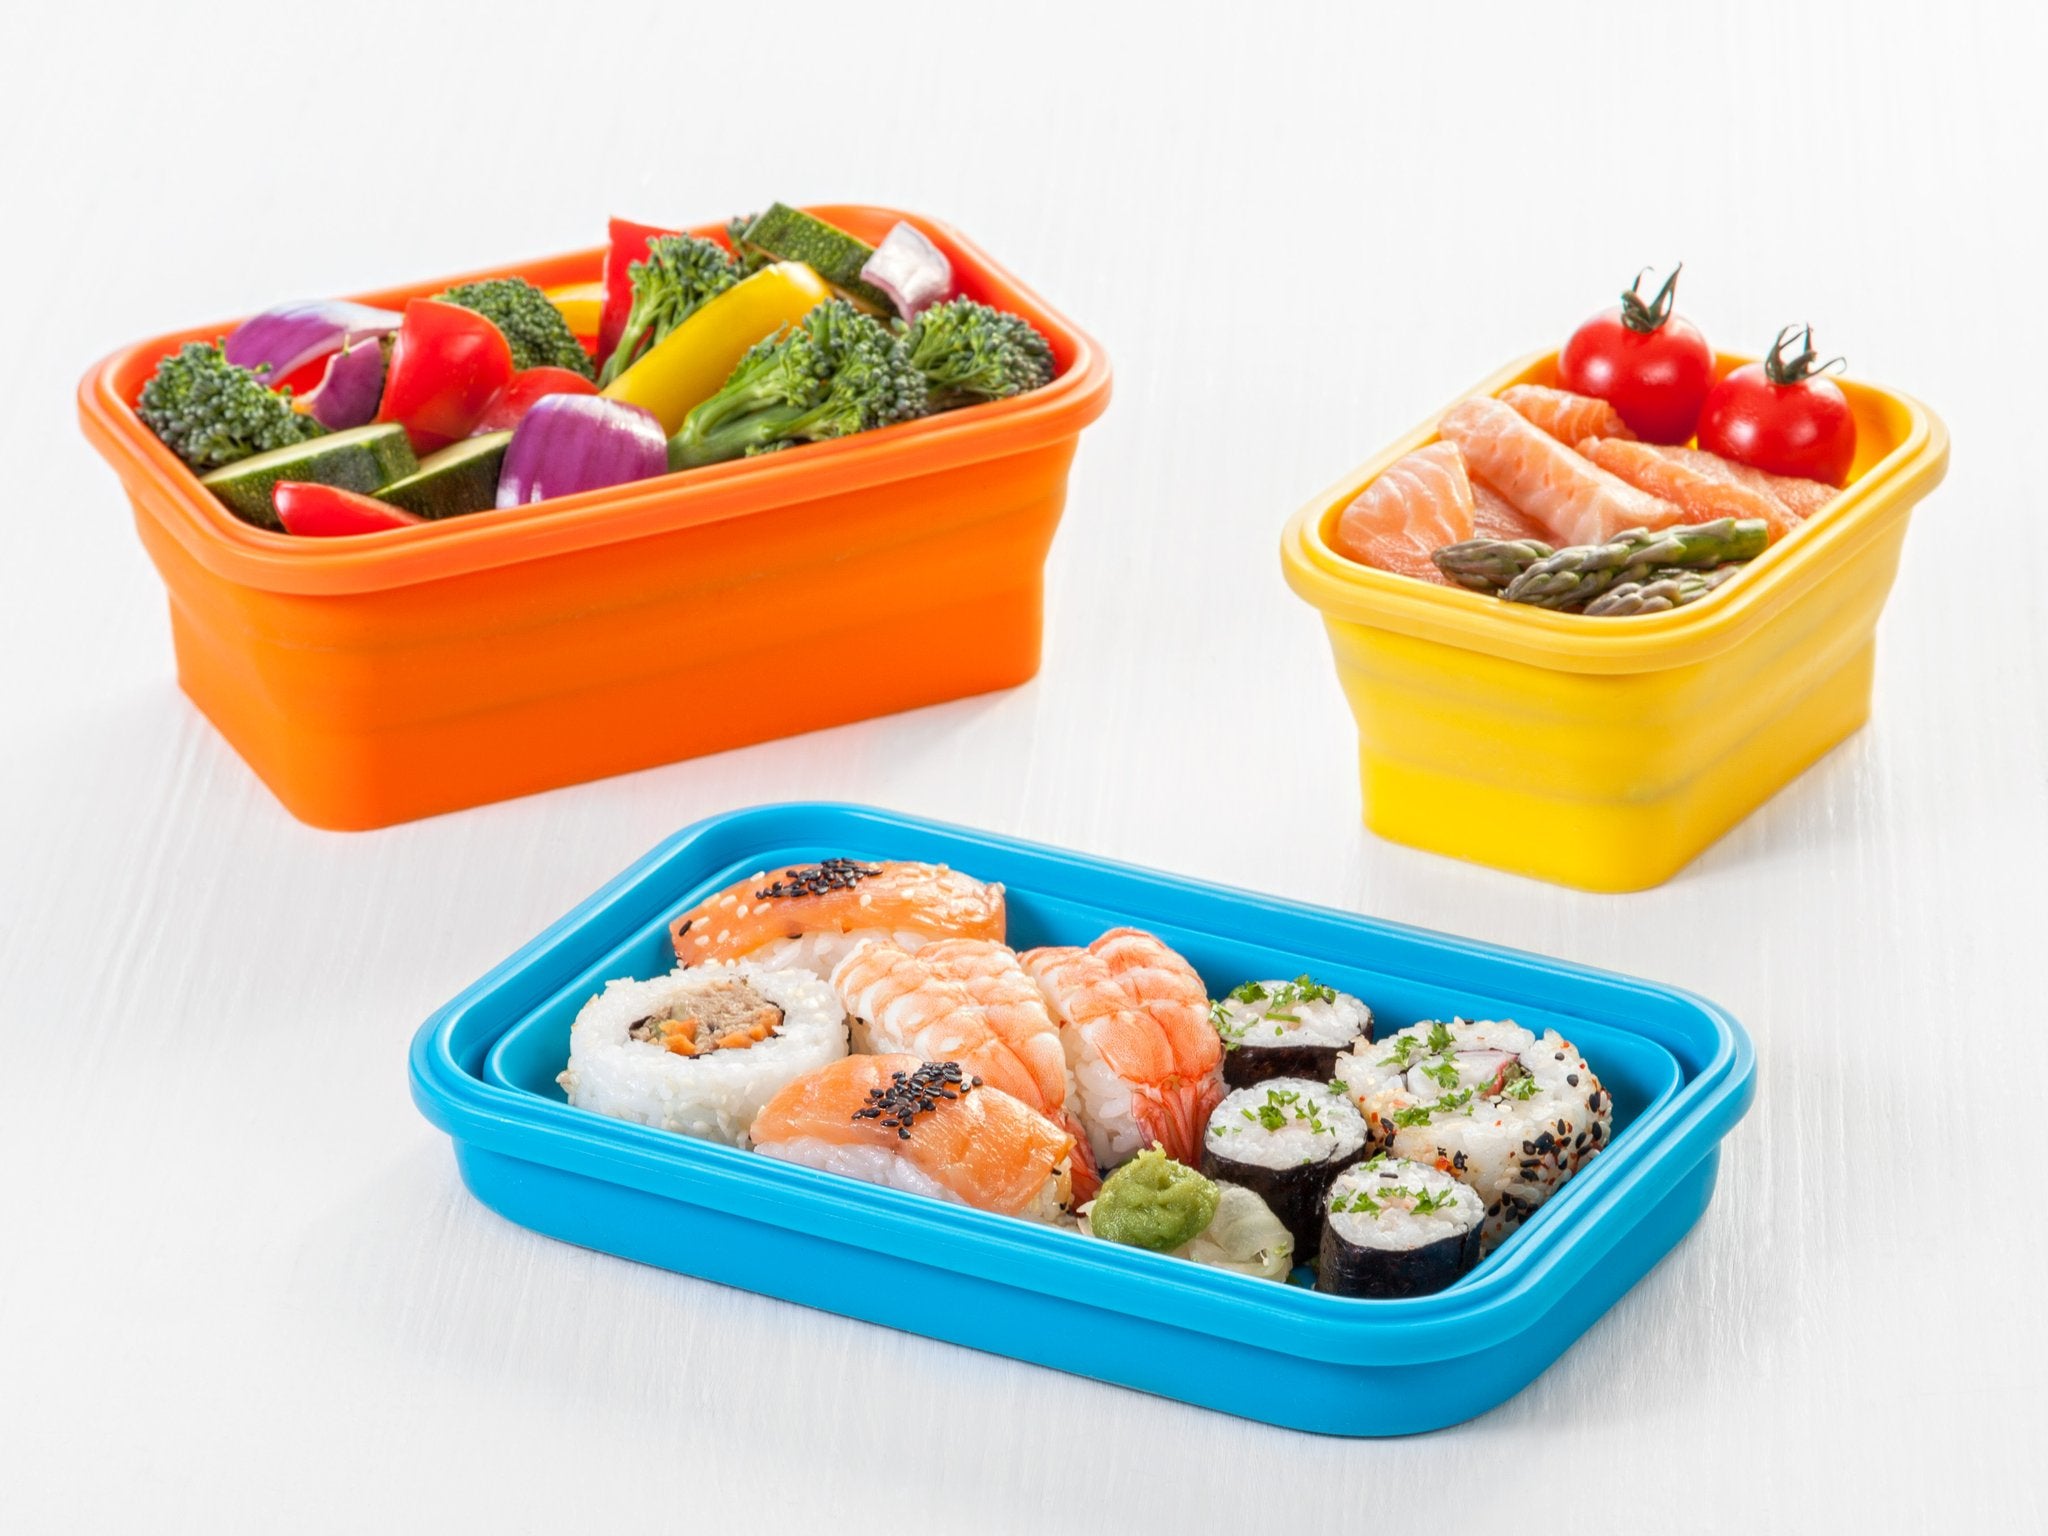 Flat Stack Collapsible Containers 3 Piece Set: Space Saving - Nova UK